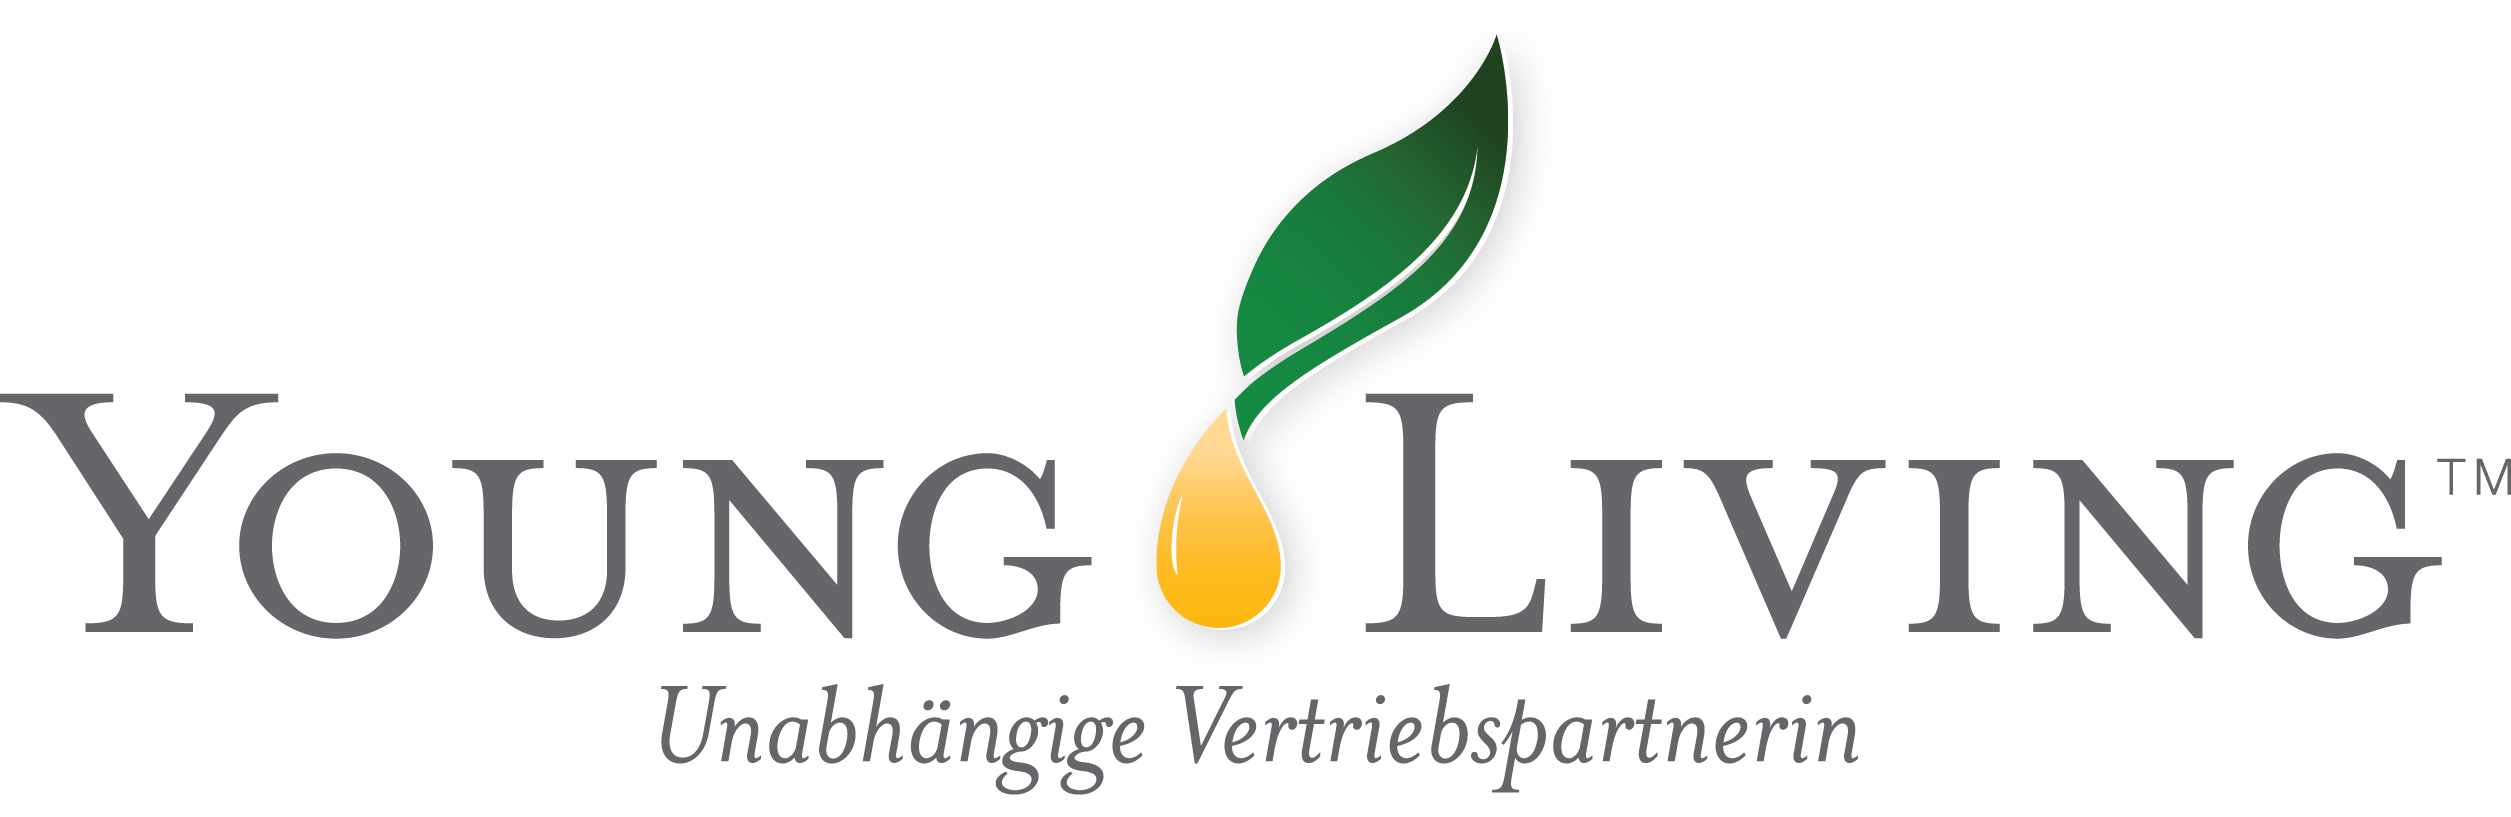 Young-Living-Logo